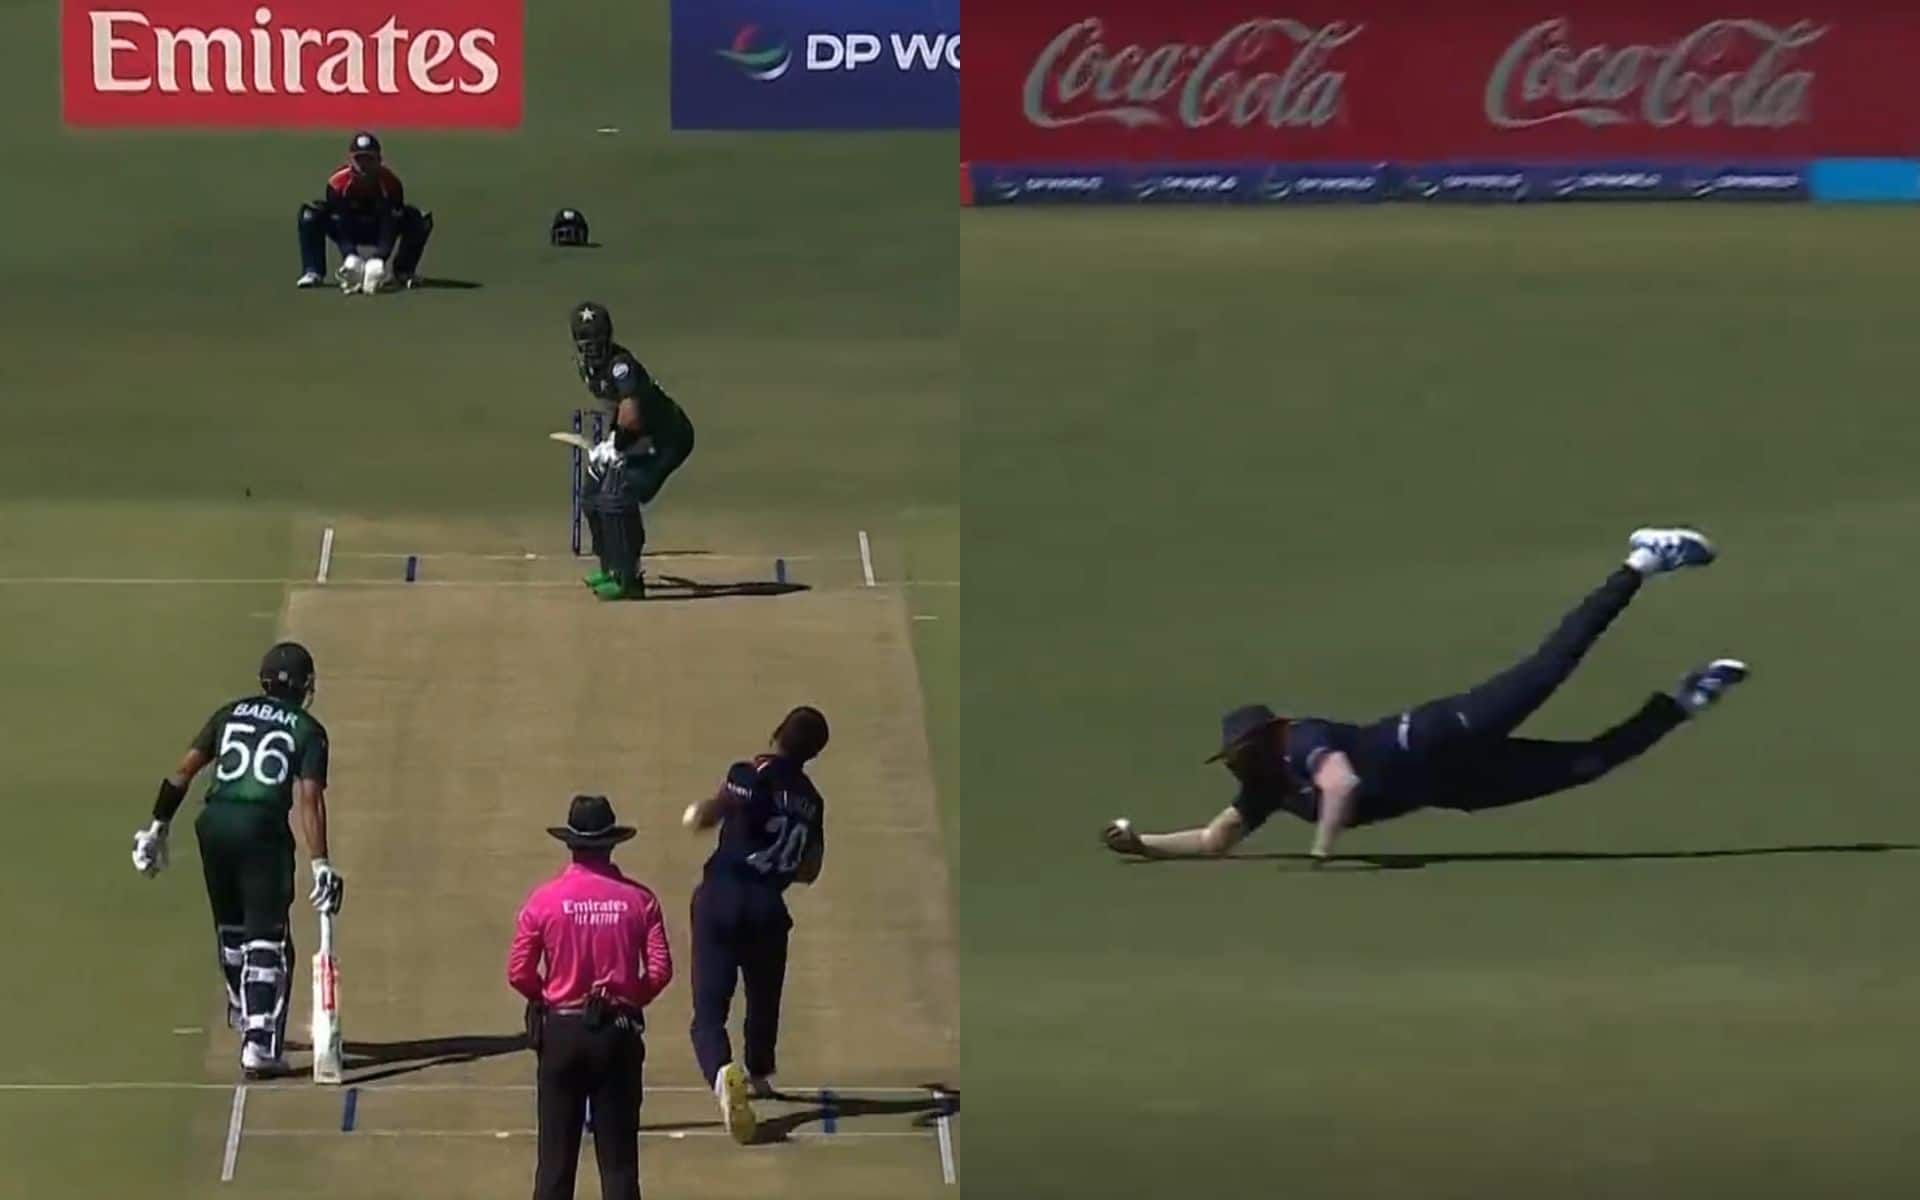 Steven Taylor's out-of-the-world catch to dismiss Rizwan (X.com)